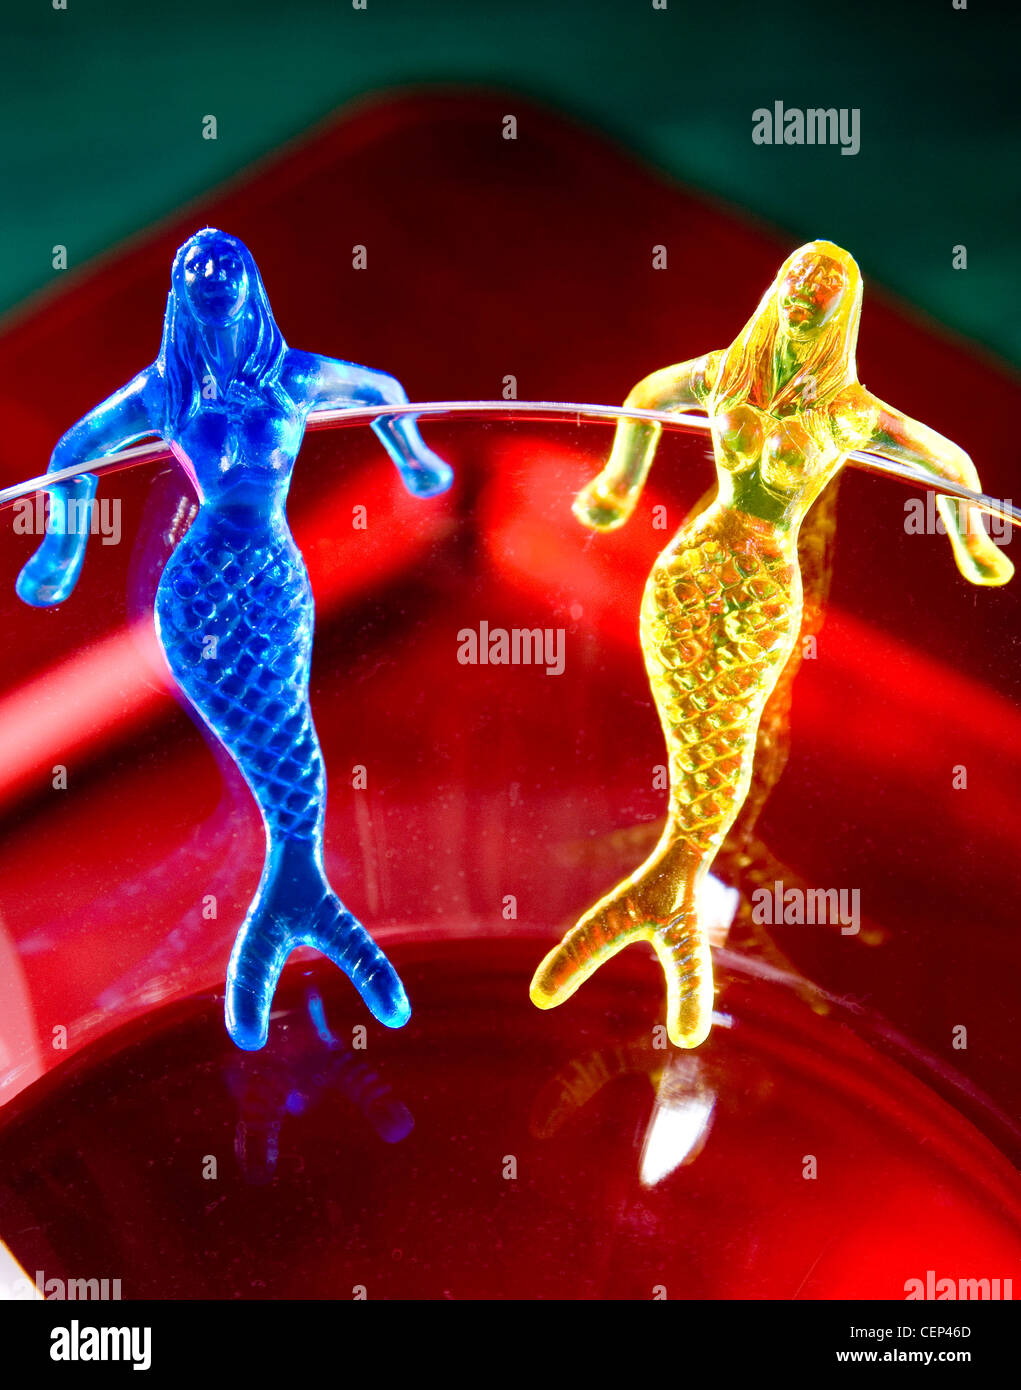 Horoscopes Gemini Two plastic mermaids clipped on to the side of a glass Stock Photo